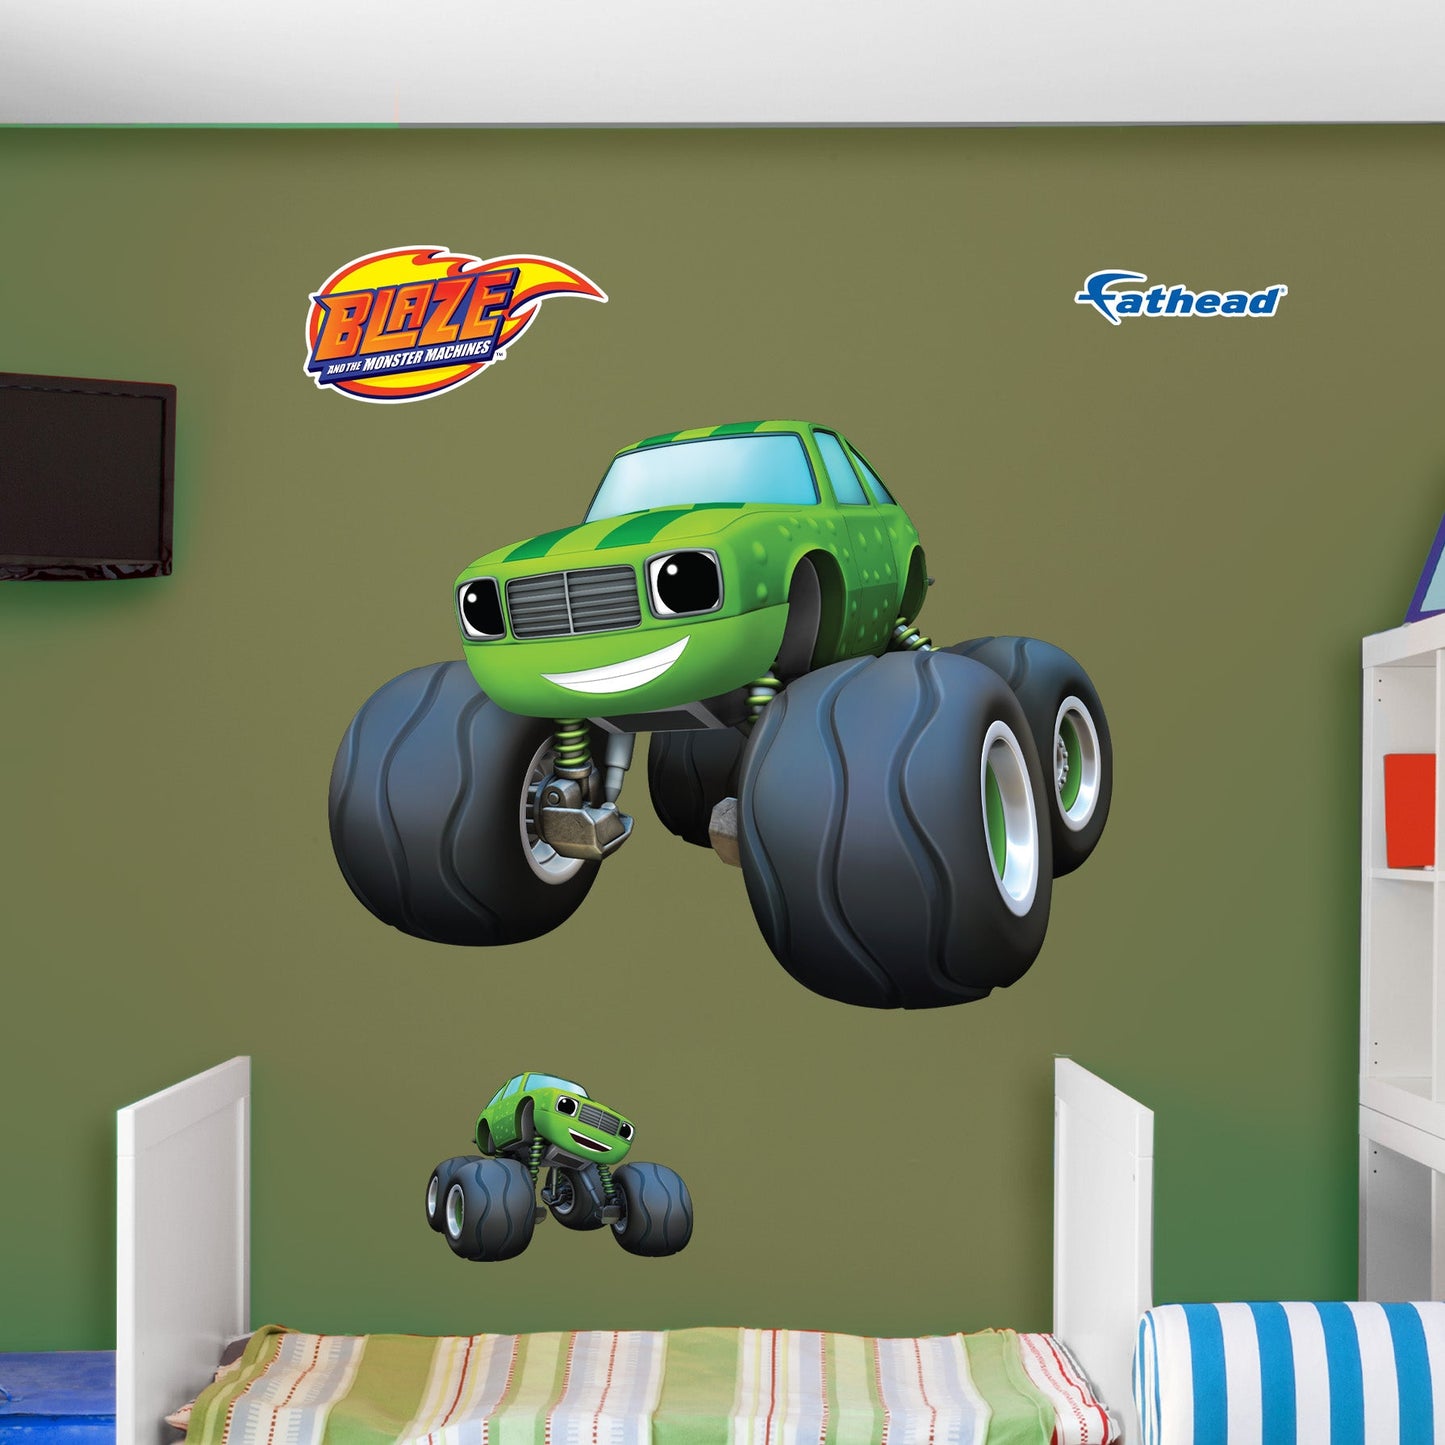 Blaze and the Monster Machines: Pickle RealBig - Officially Licensed Nickelodeon Removable Adhesive Decal